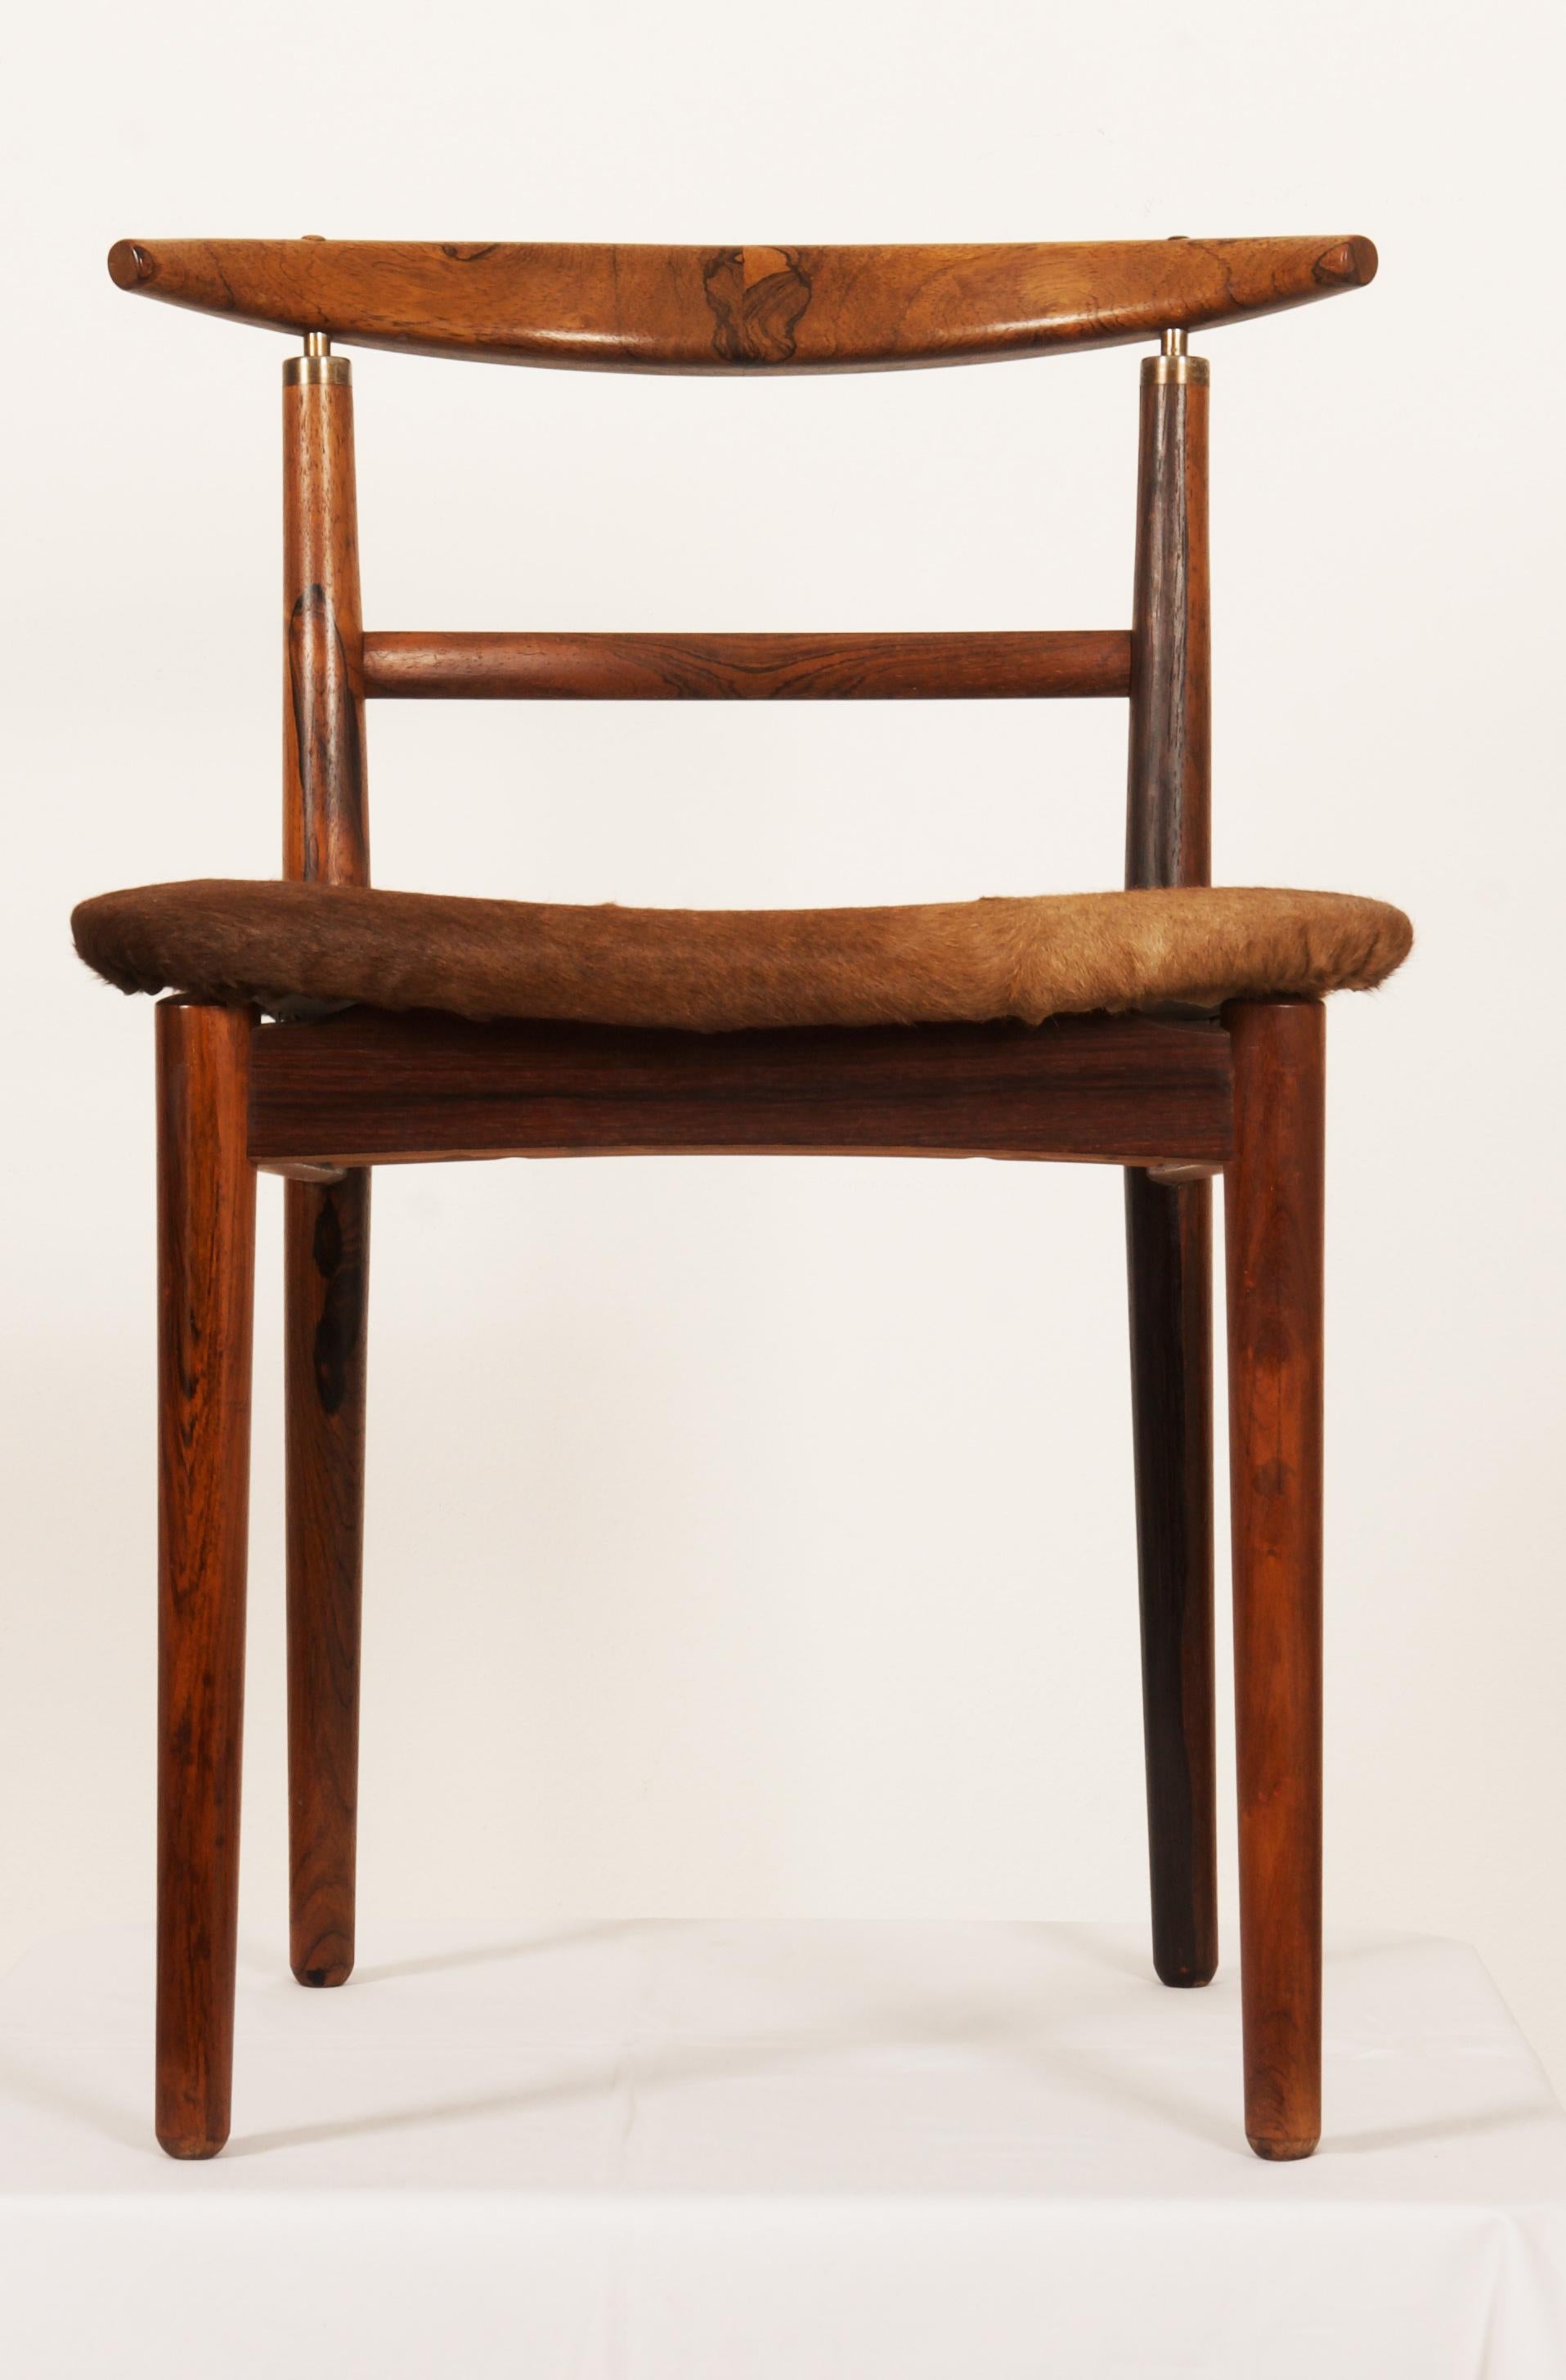 Danish Dining Room Chair by Helge Sibast and Borge Rammeskov For Sale 2